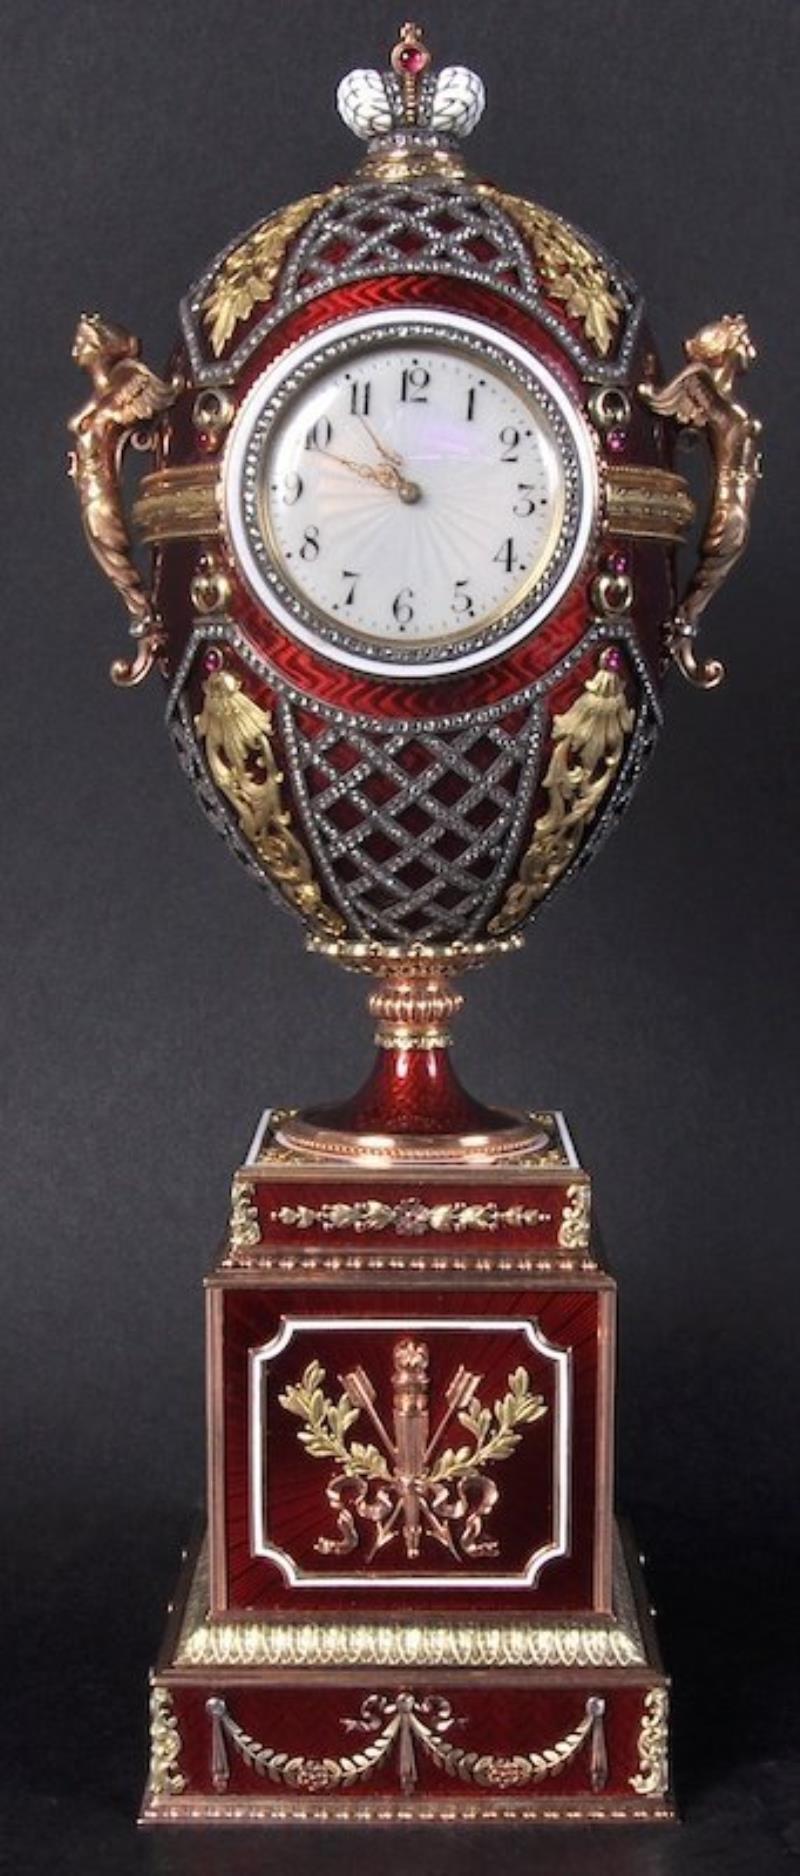 A SUPERB GOLD ENAMEL AND DIAMOND TABLE CLOCK in the